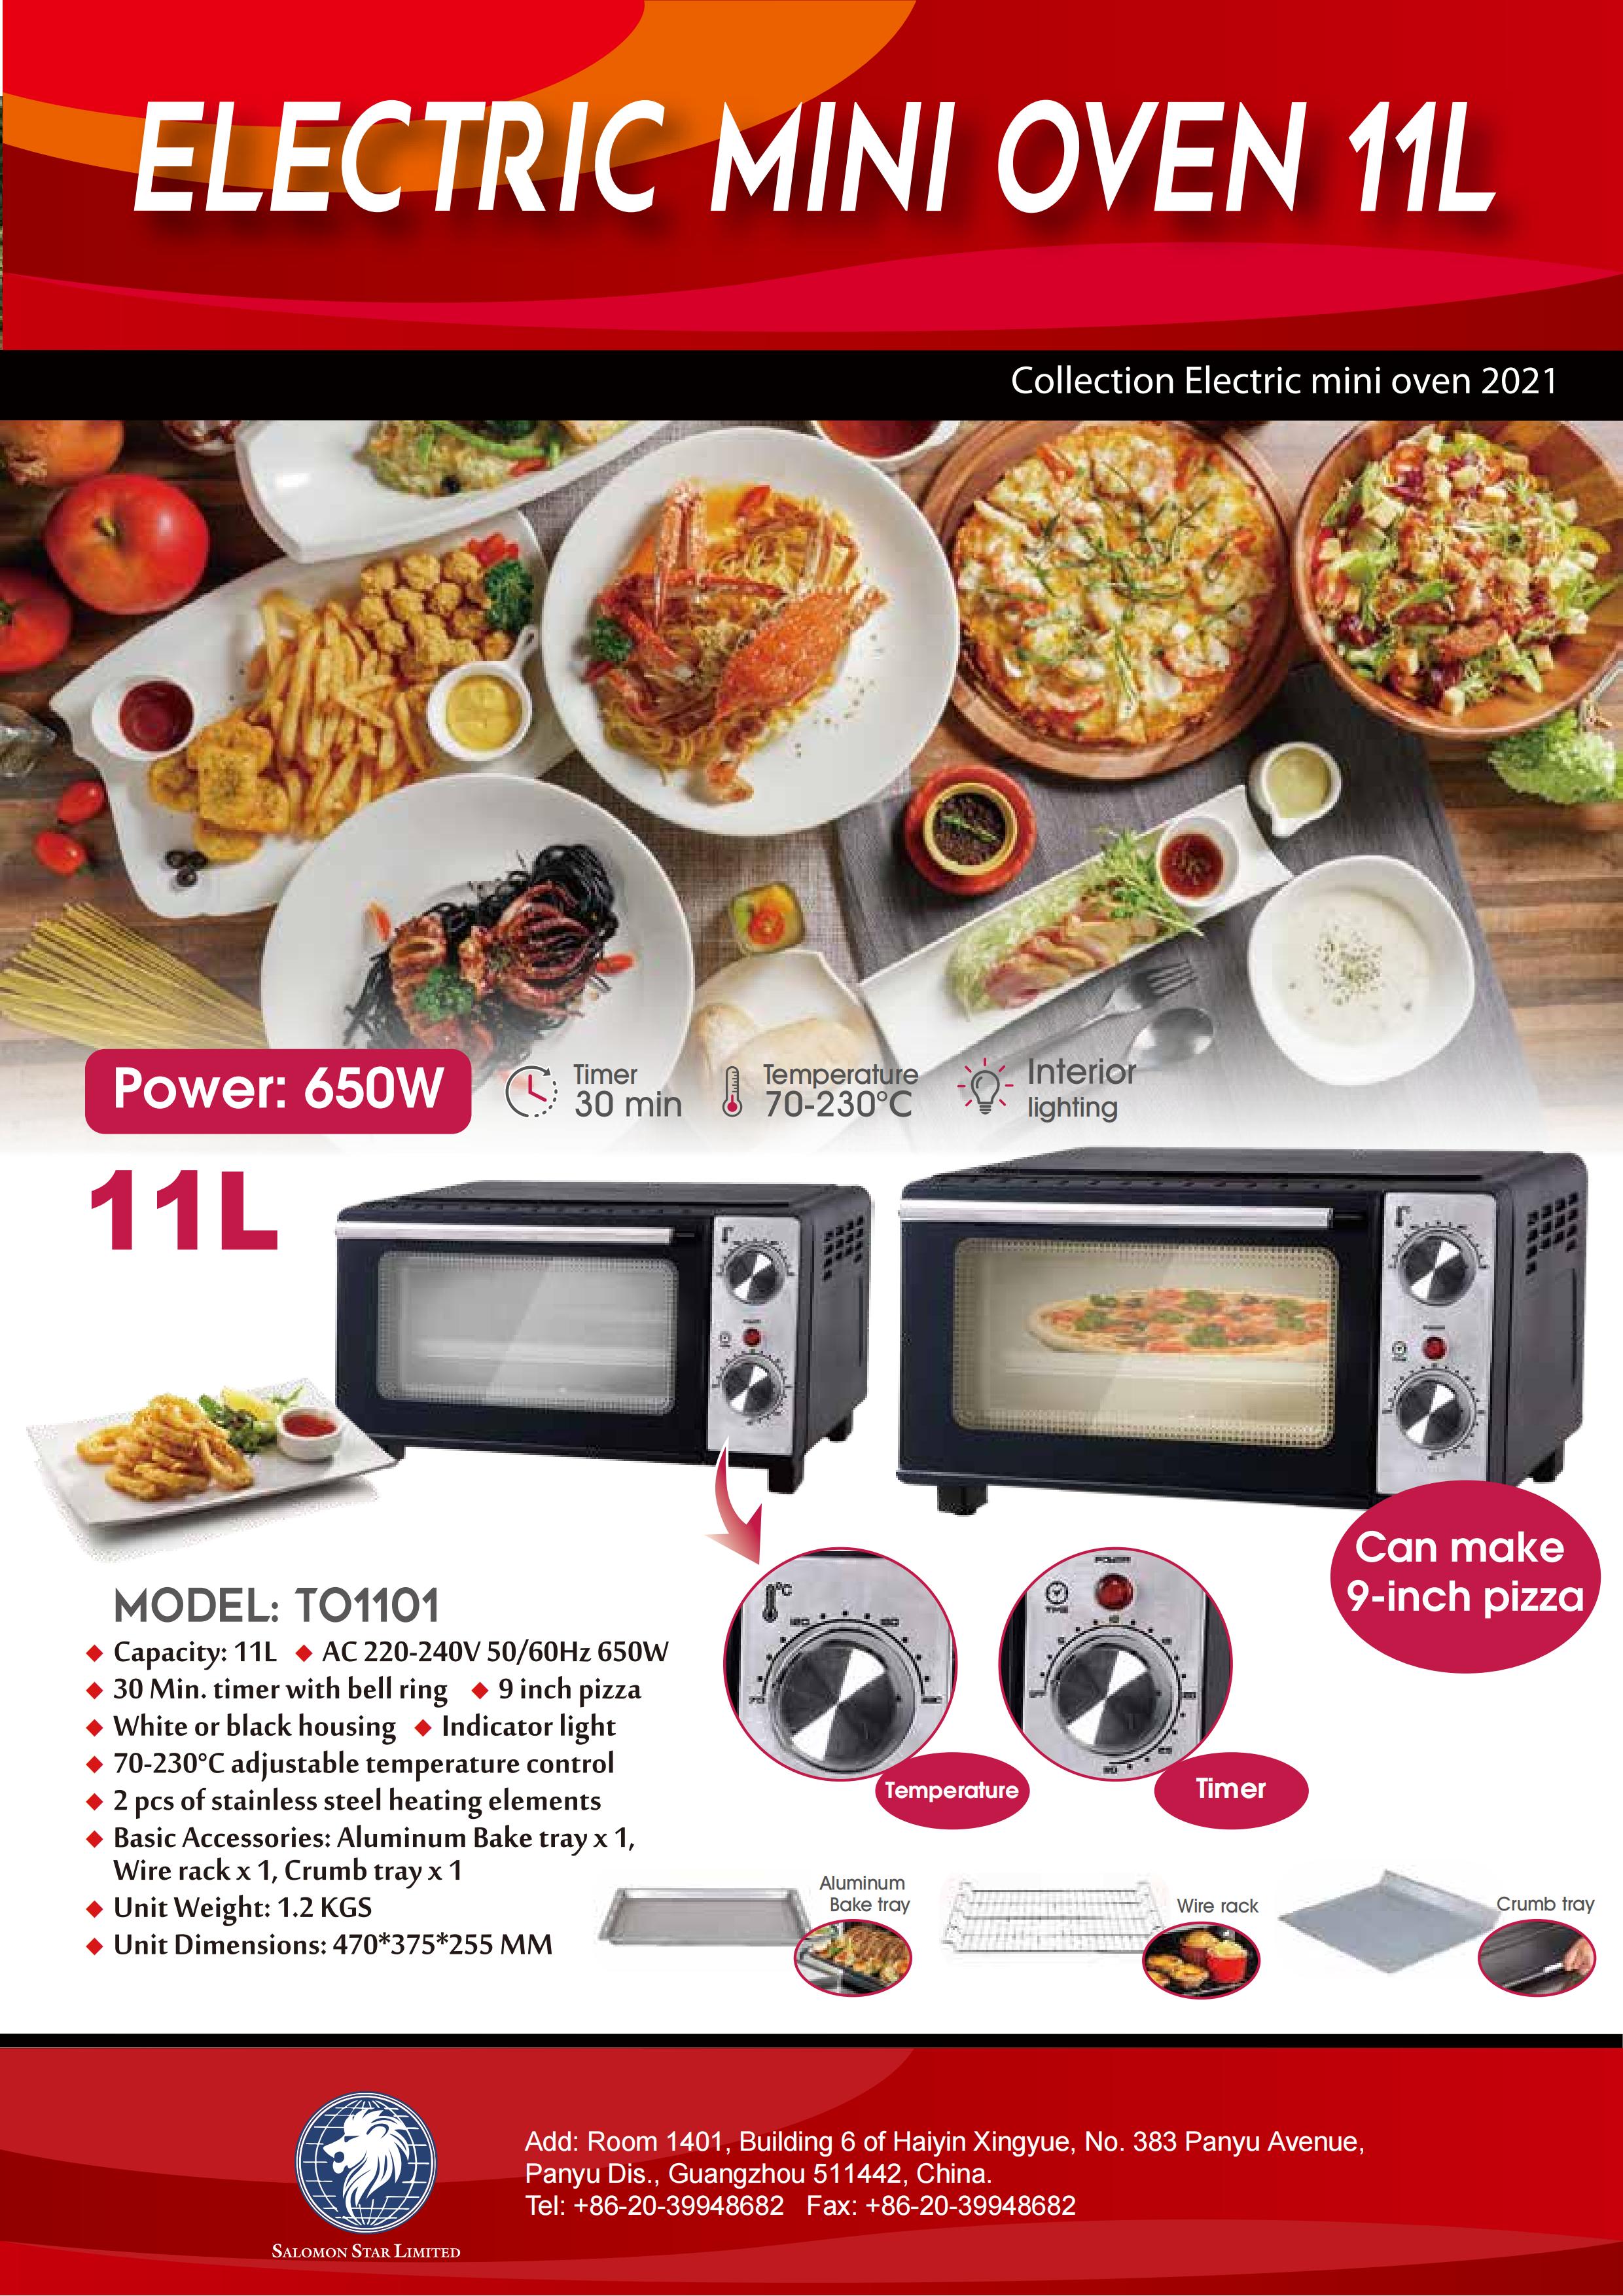 11L electric oven